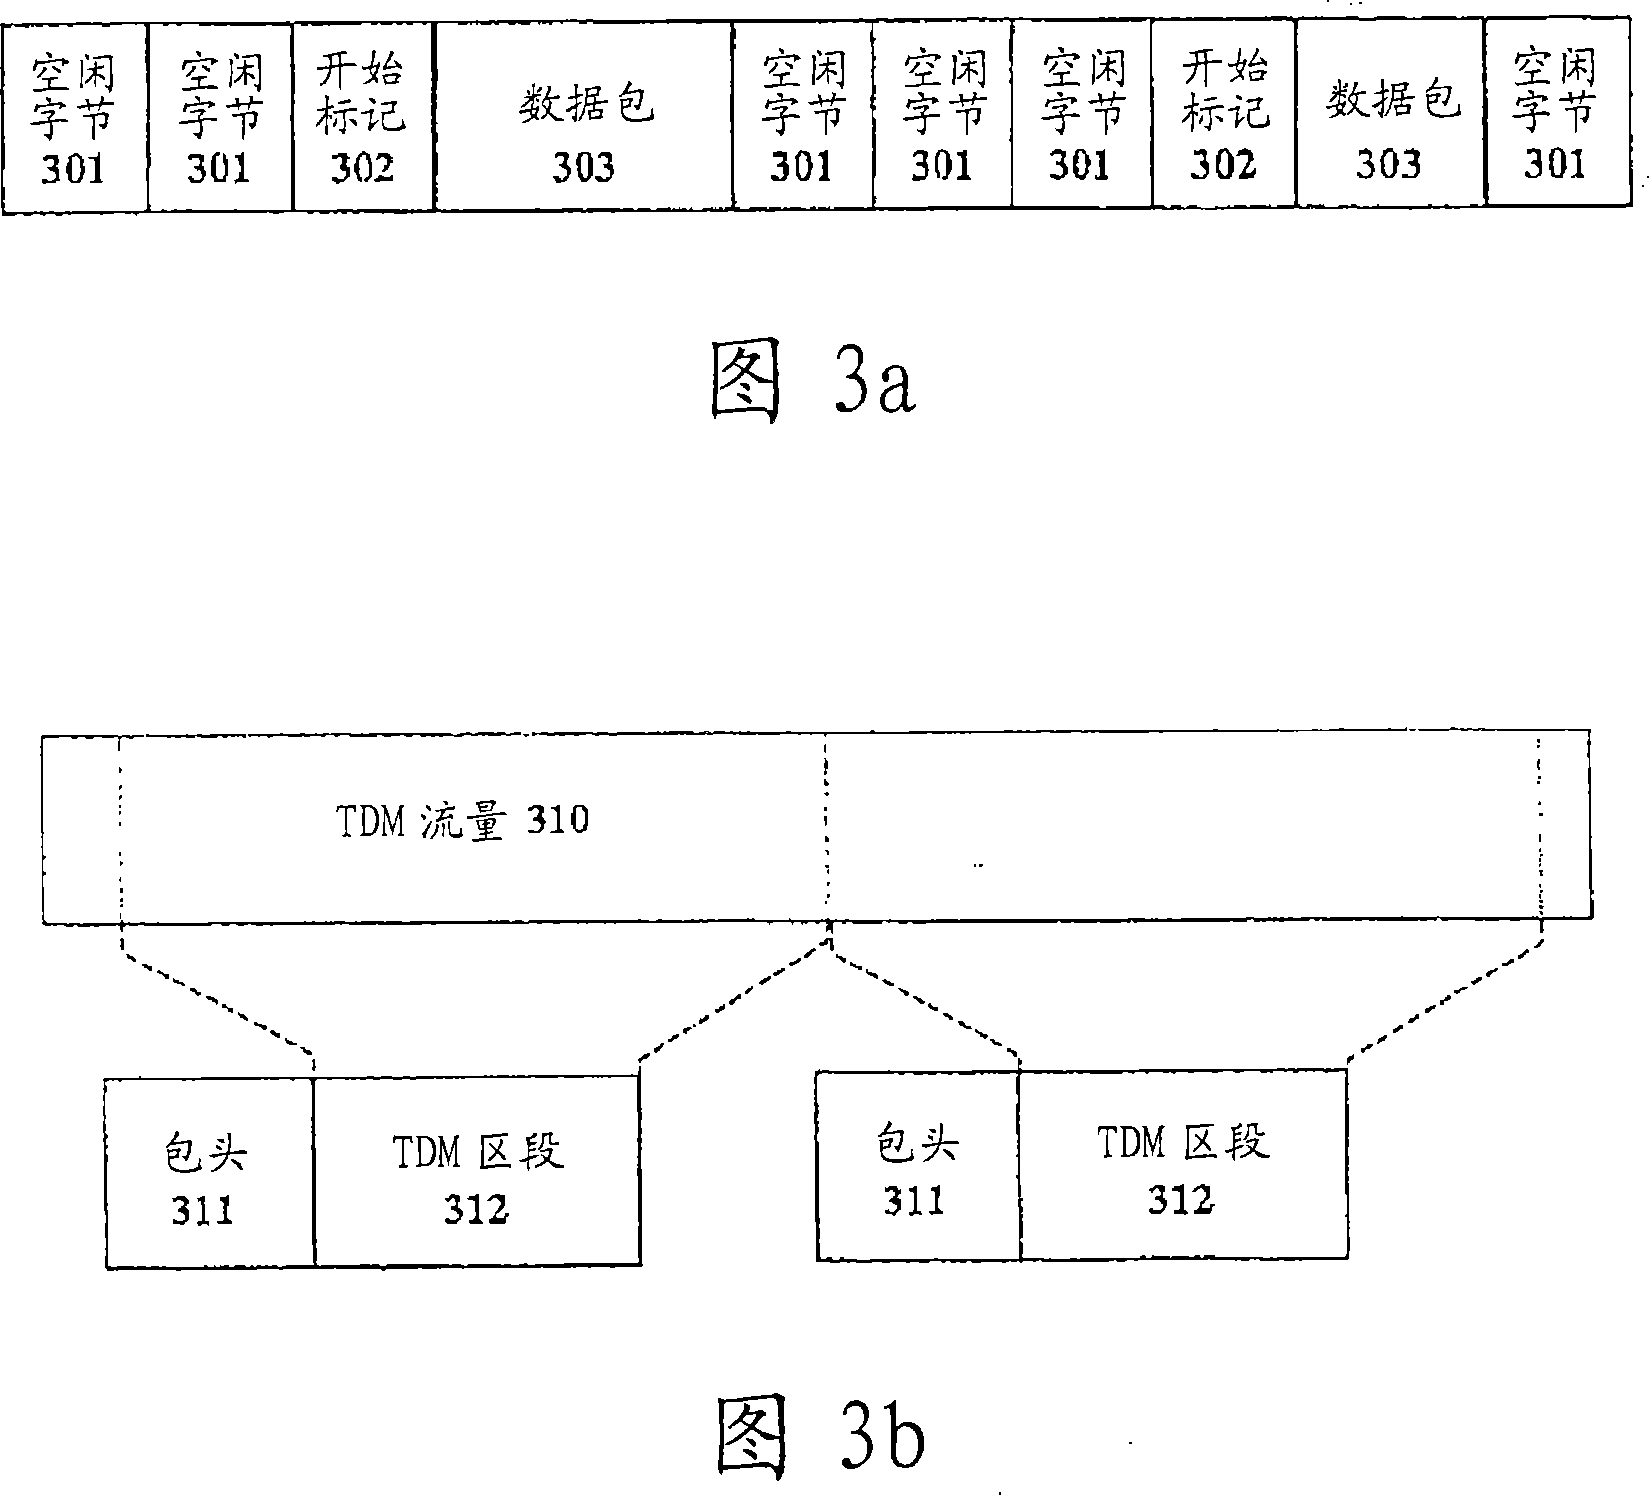 A small form-factor device implementing protocol conversion